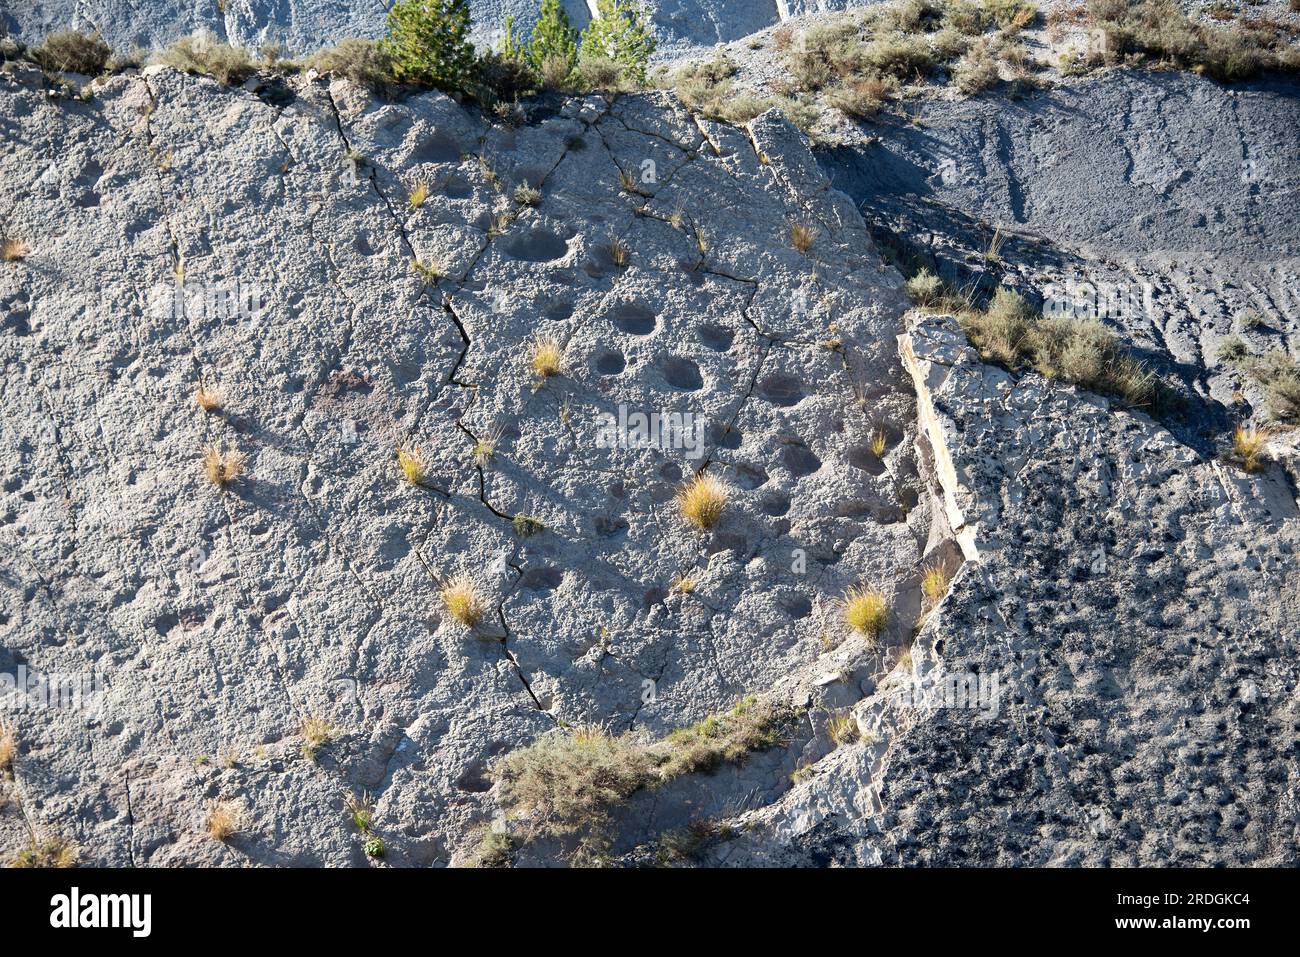 Ichnofossils or trace fossils of sauropods dinosaurs footprints (Titanosaurus). This photo was taken in Fumanya Nord, Figols, Barcelona, Catalonia, Sp Stock Photo